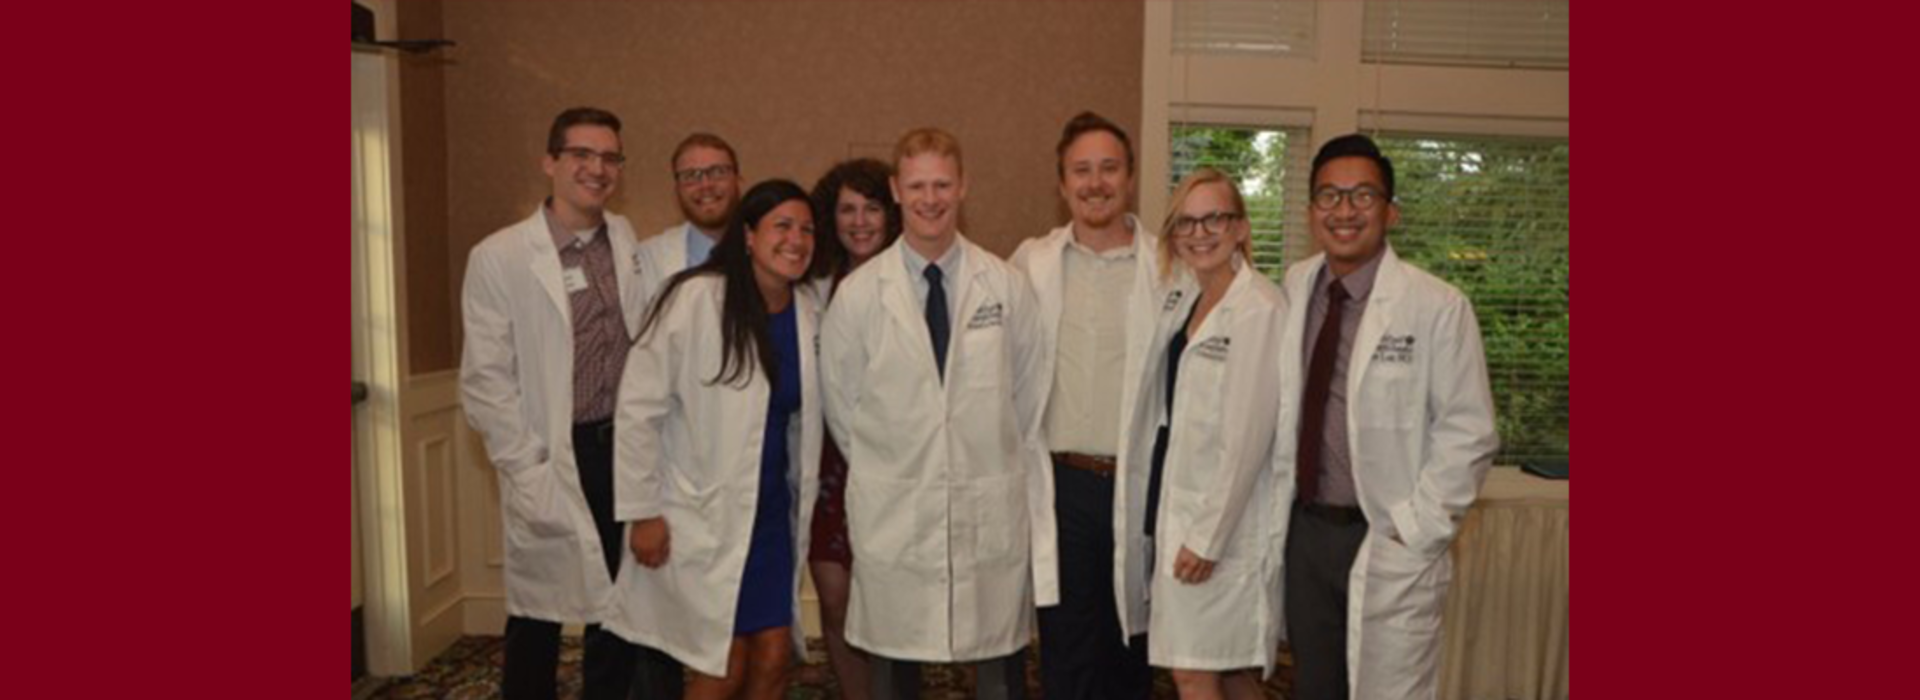 DFMCH family medicine 2021 graduates from Woodwinds